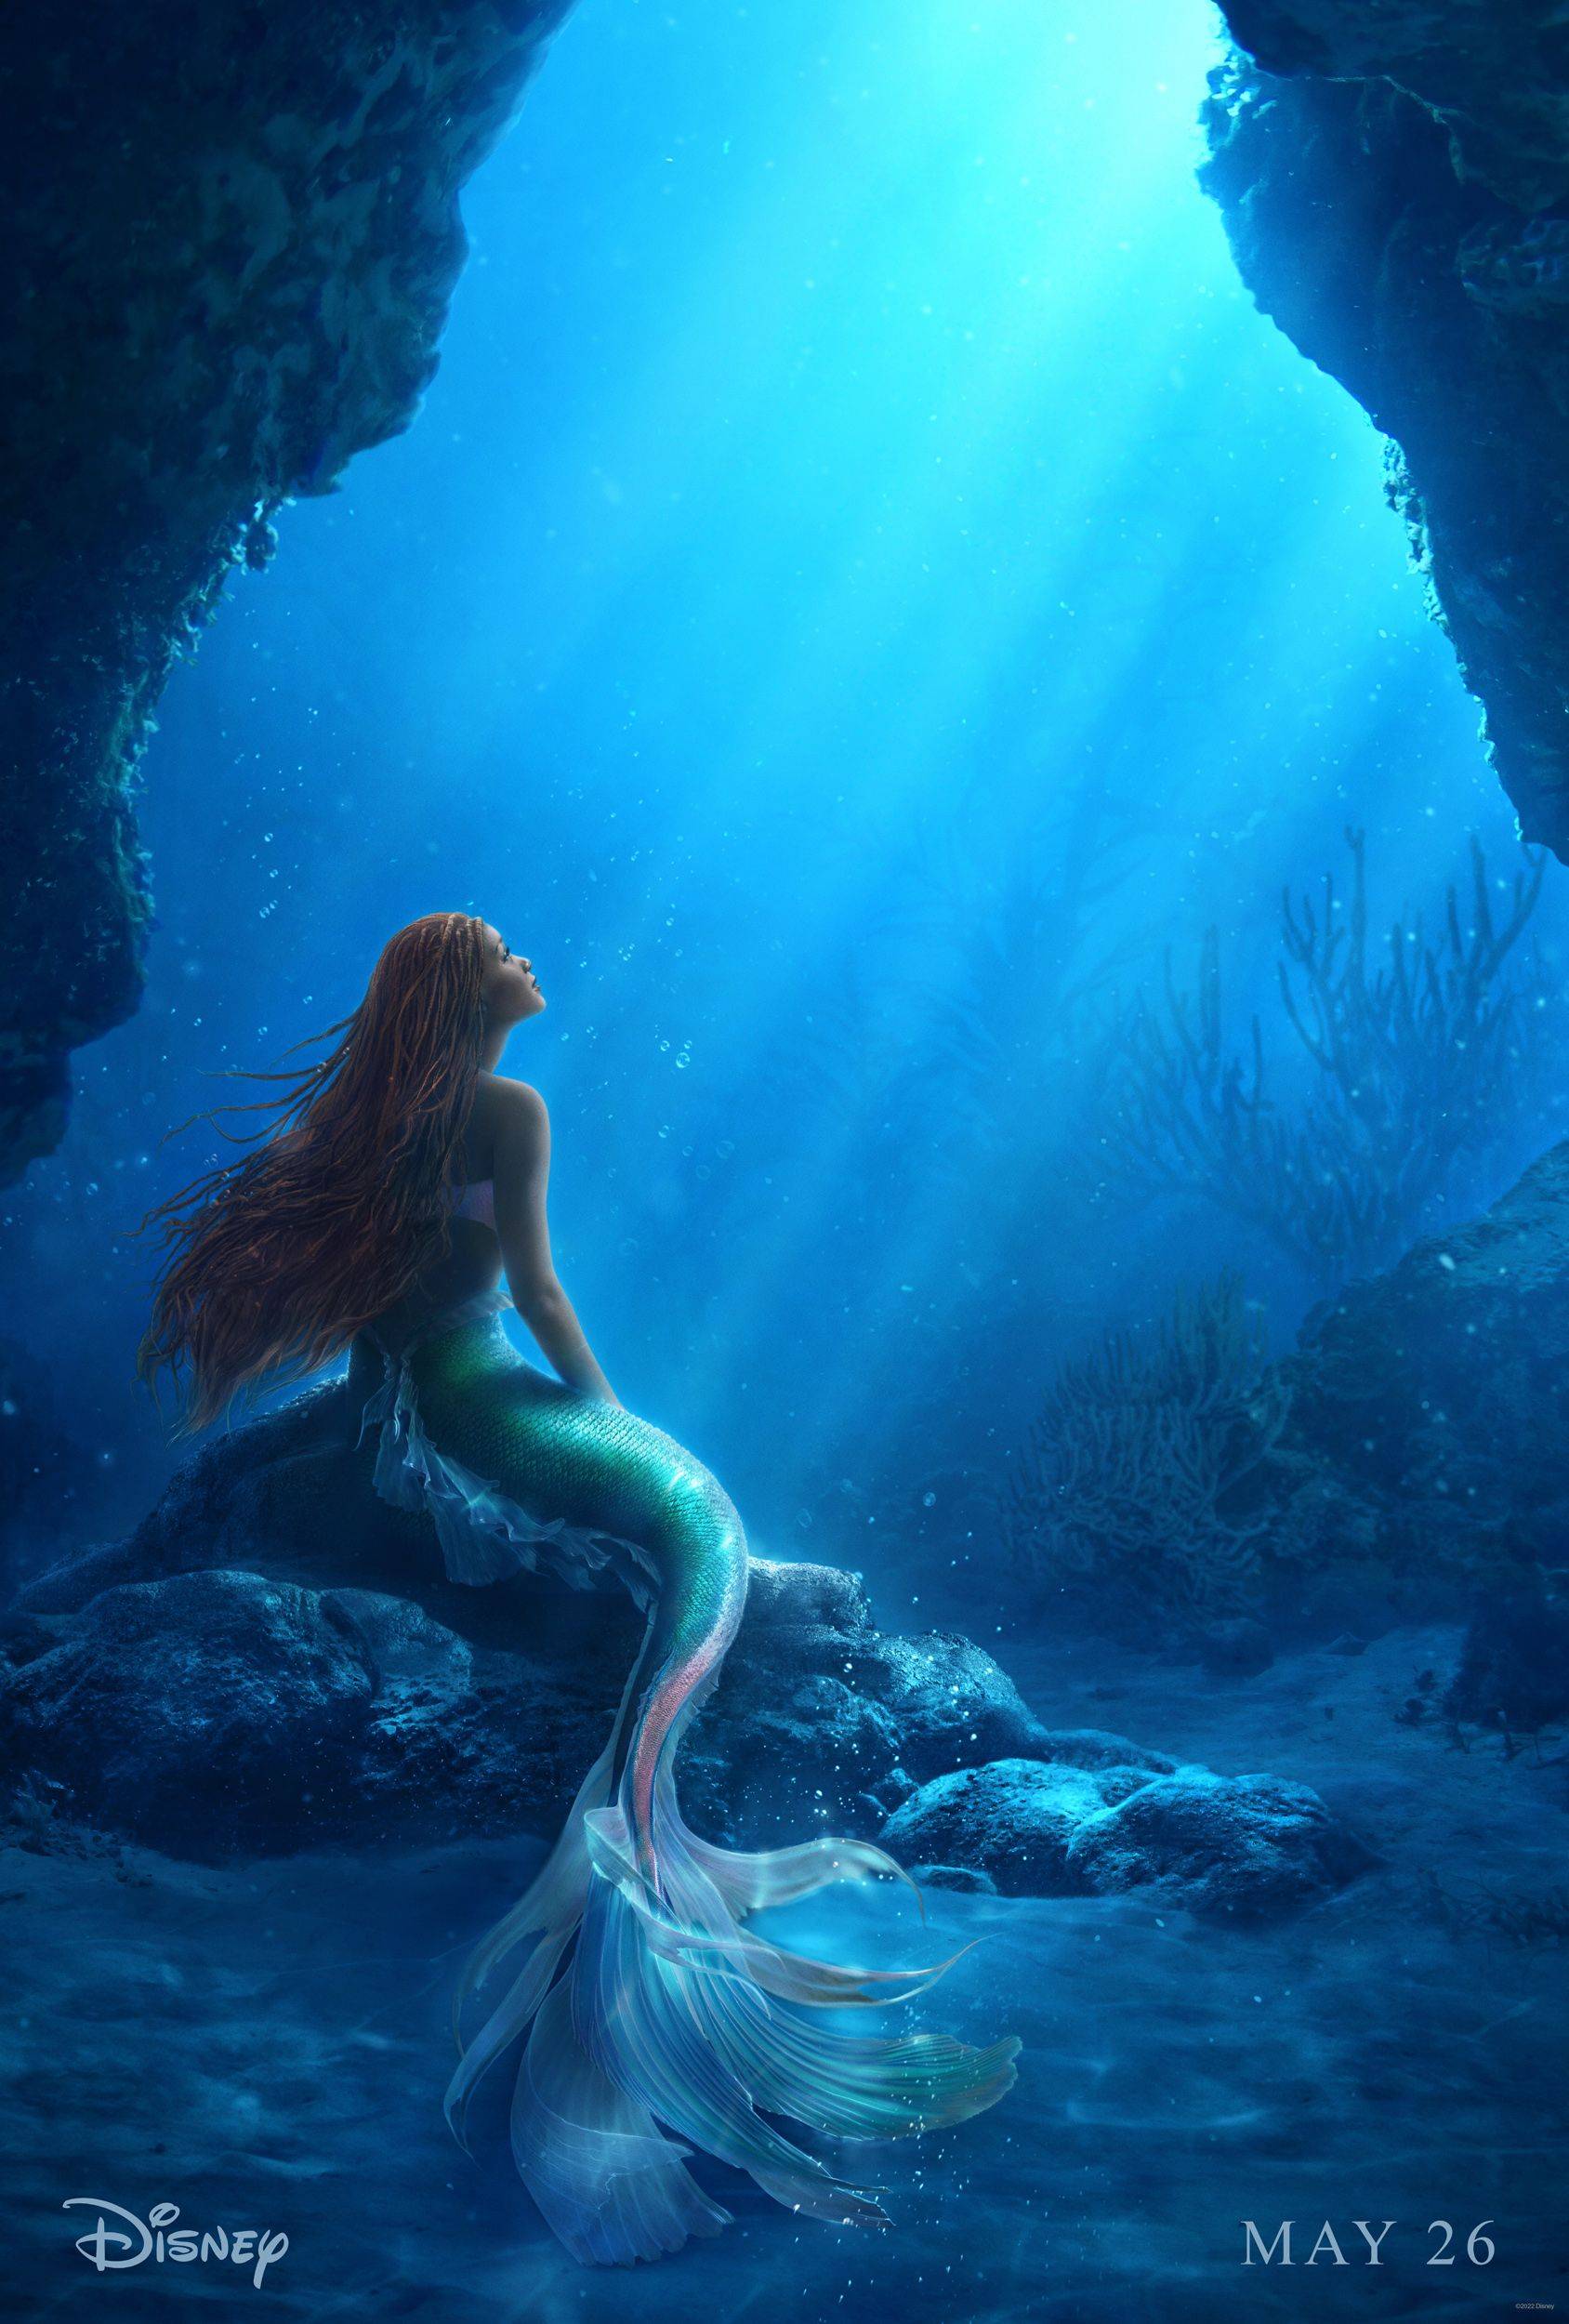 See the latest teaser for the upcoming live-action version of Disney's 'The Little Mermaid' coming to theaters summer 2023